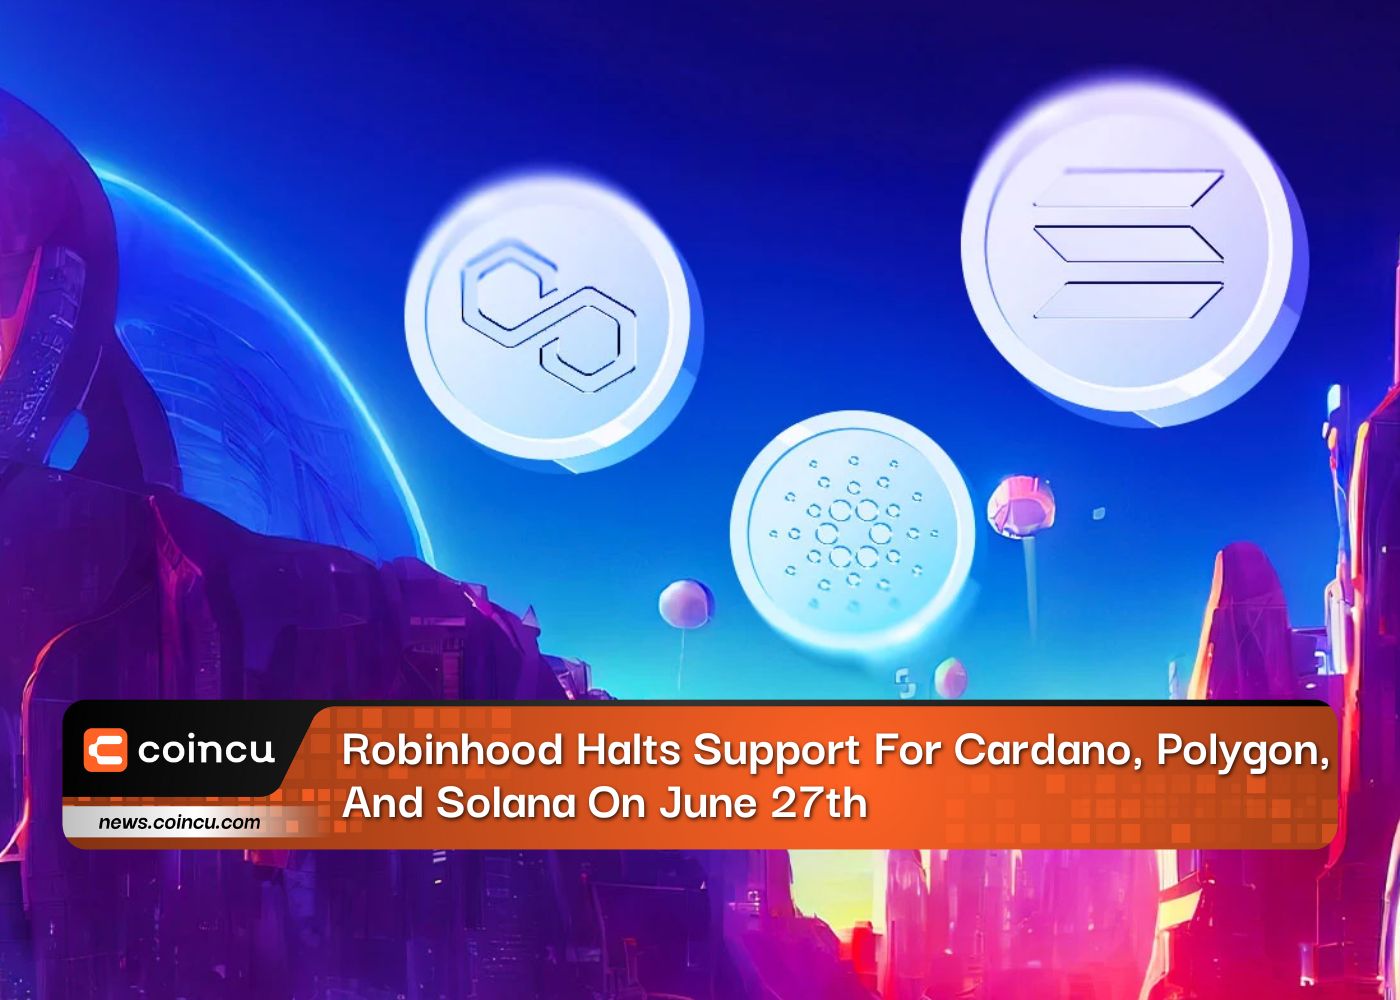 Robinhood Halts Support For Cardano, Polygon, And Solana On June 27th